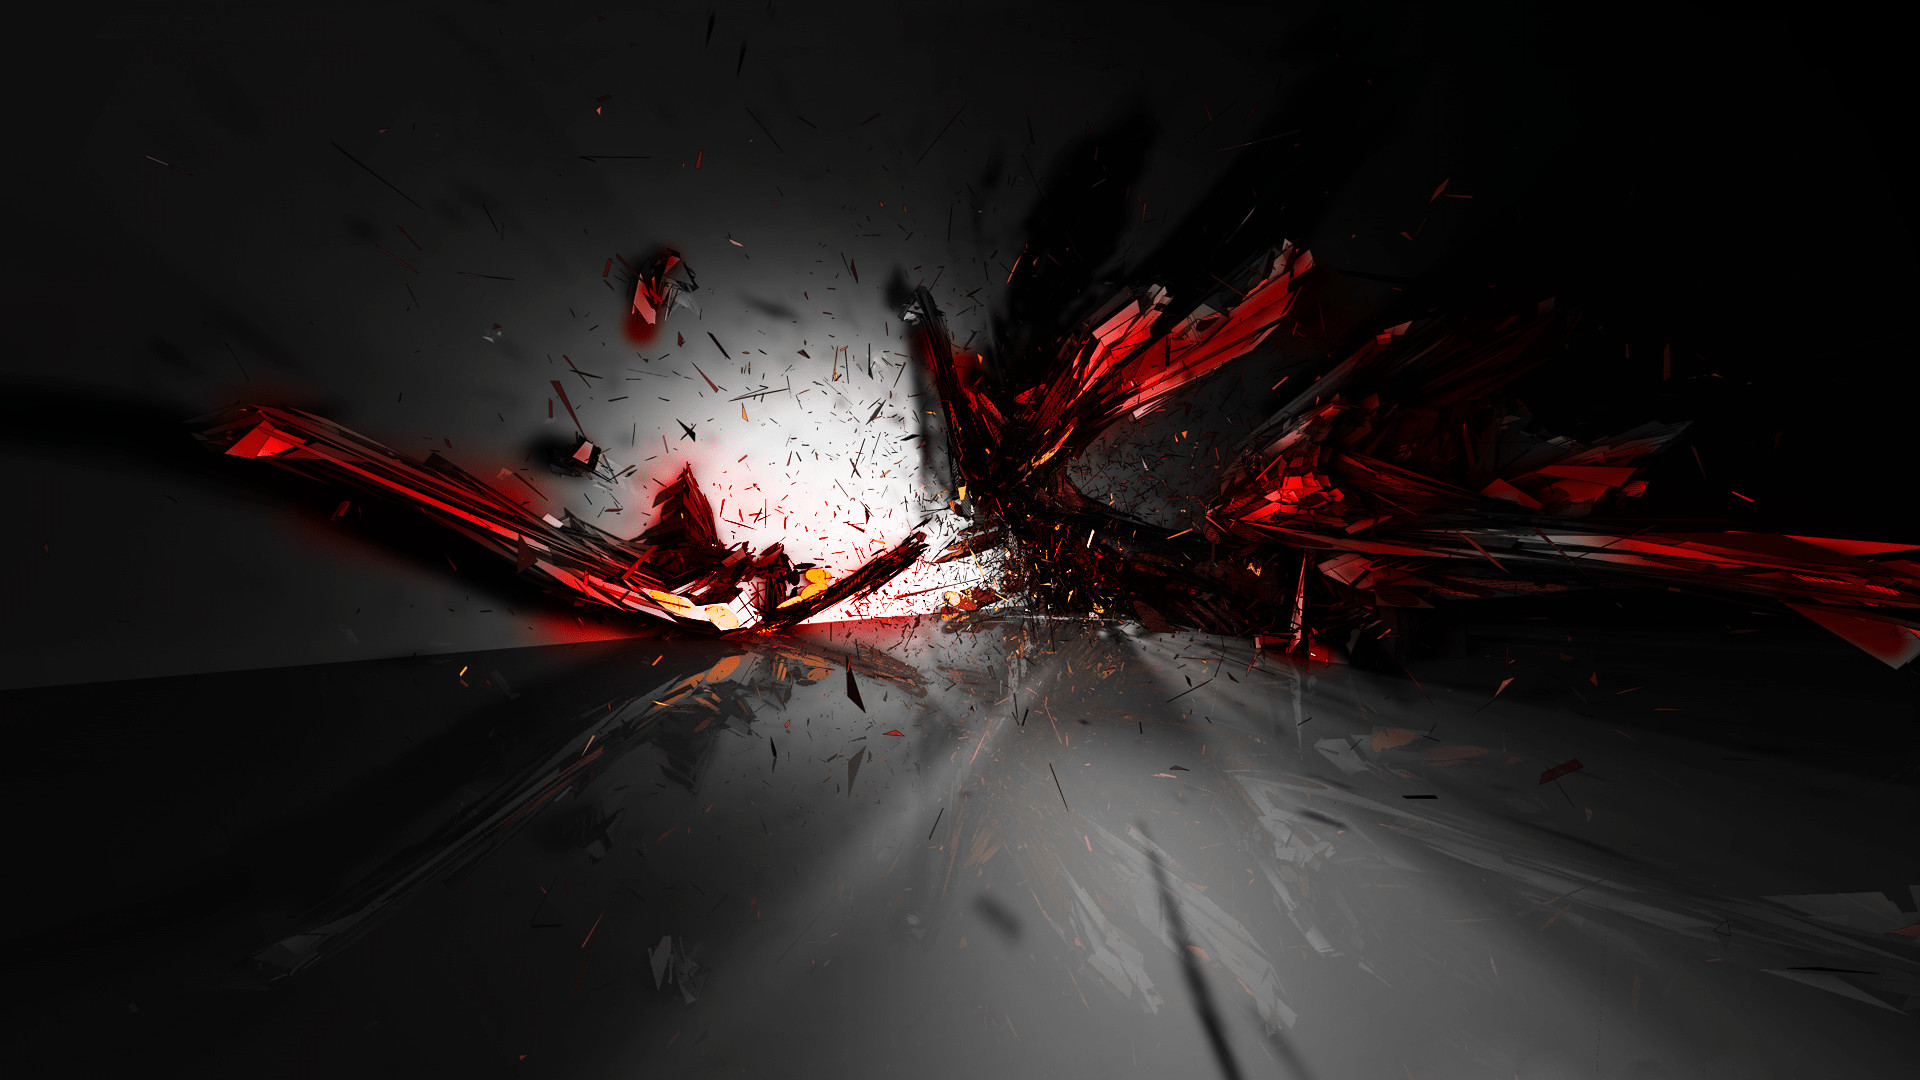 1920x1080 red abstract wallpapers desktop background, cool wallpapers desktop  background, images of red abstract,